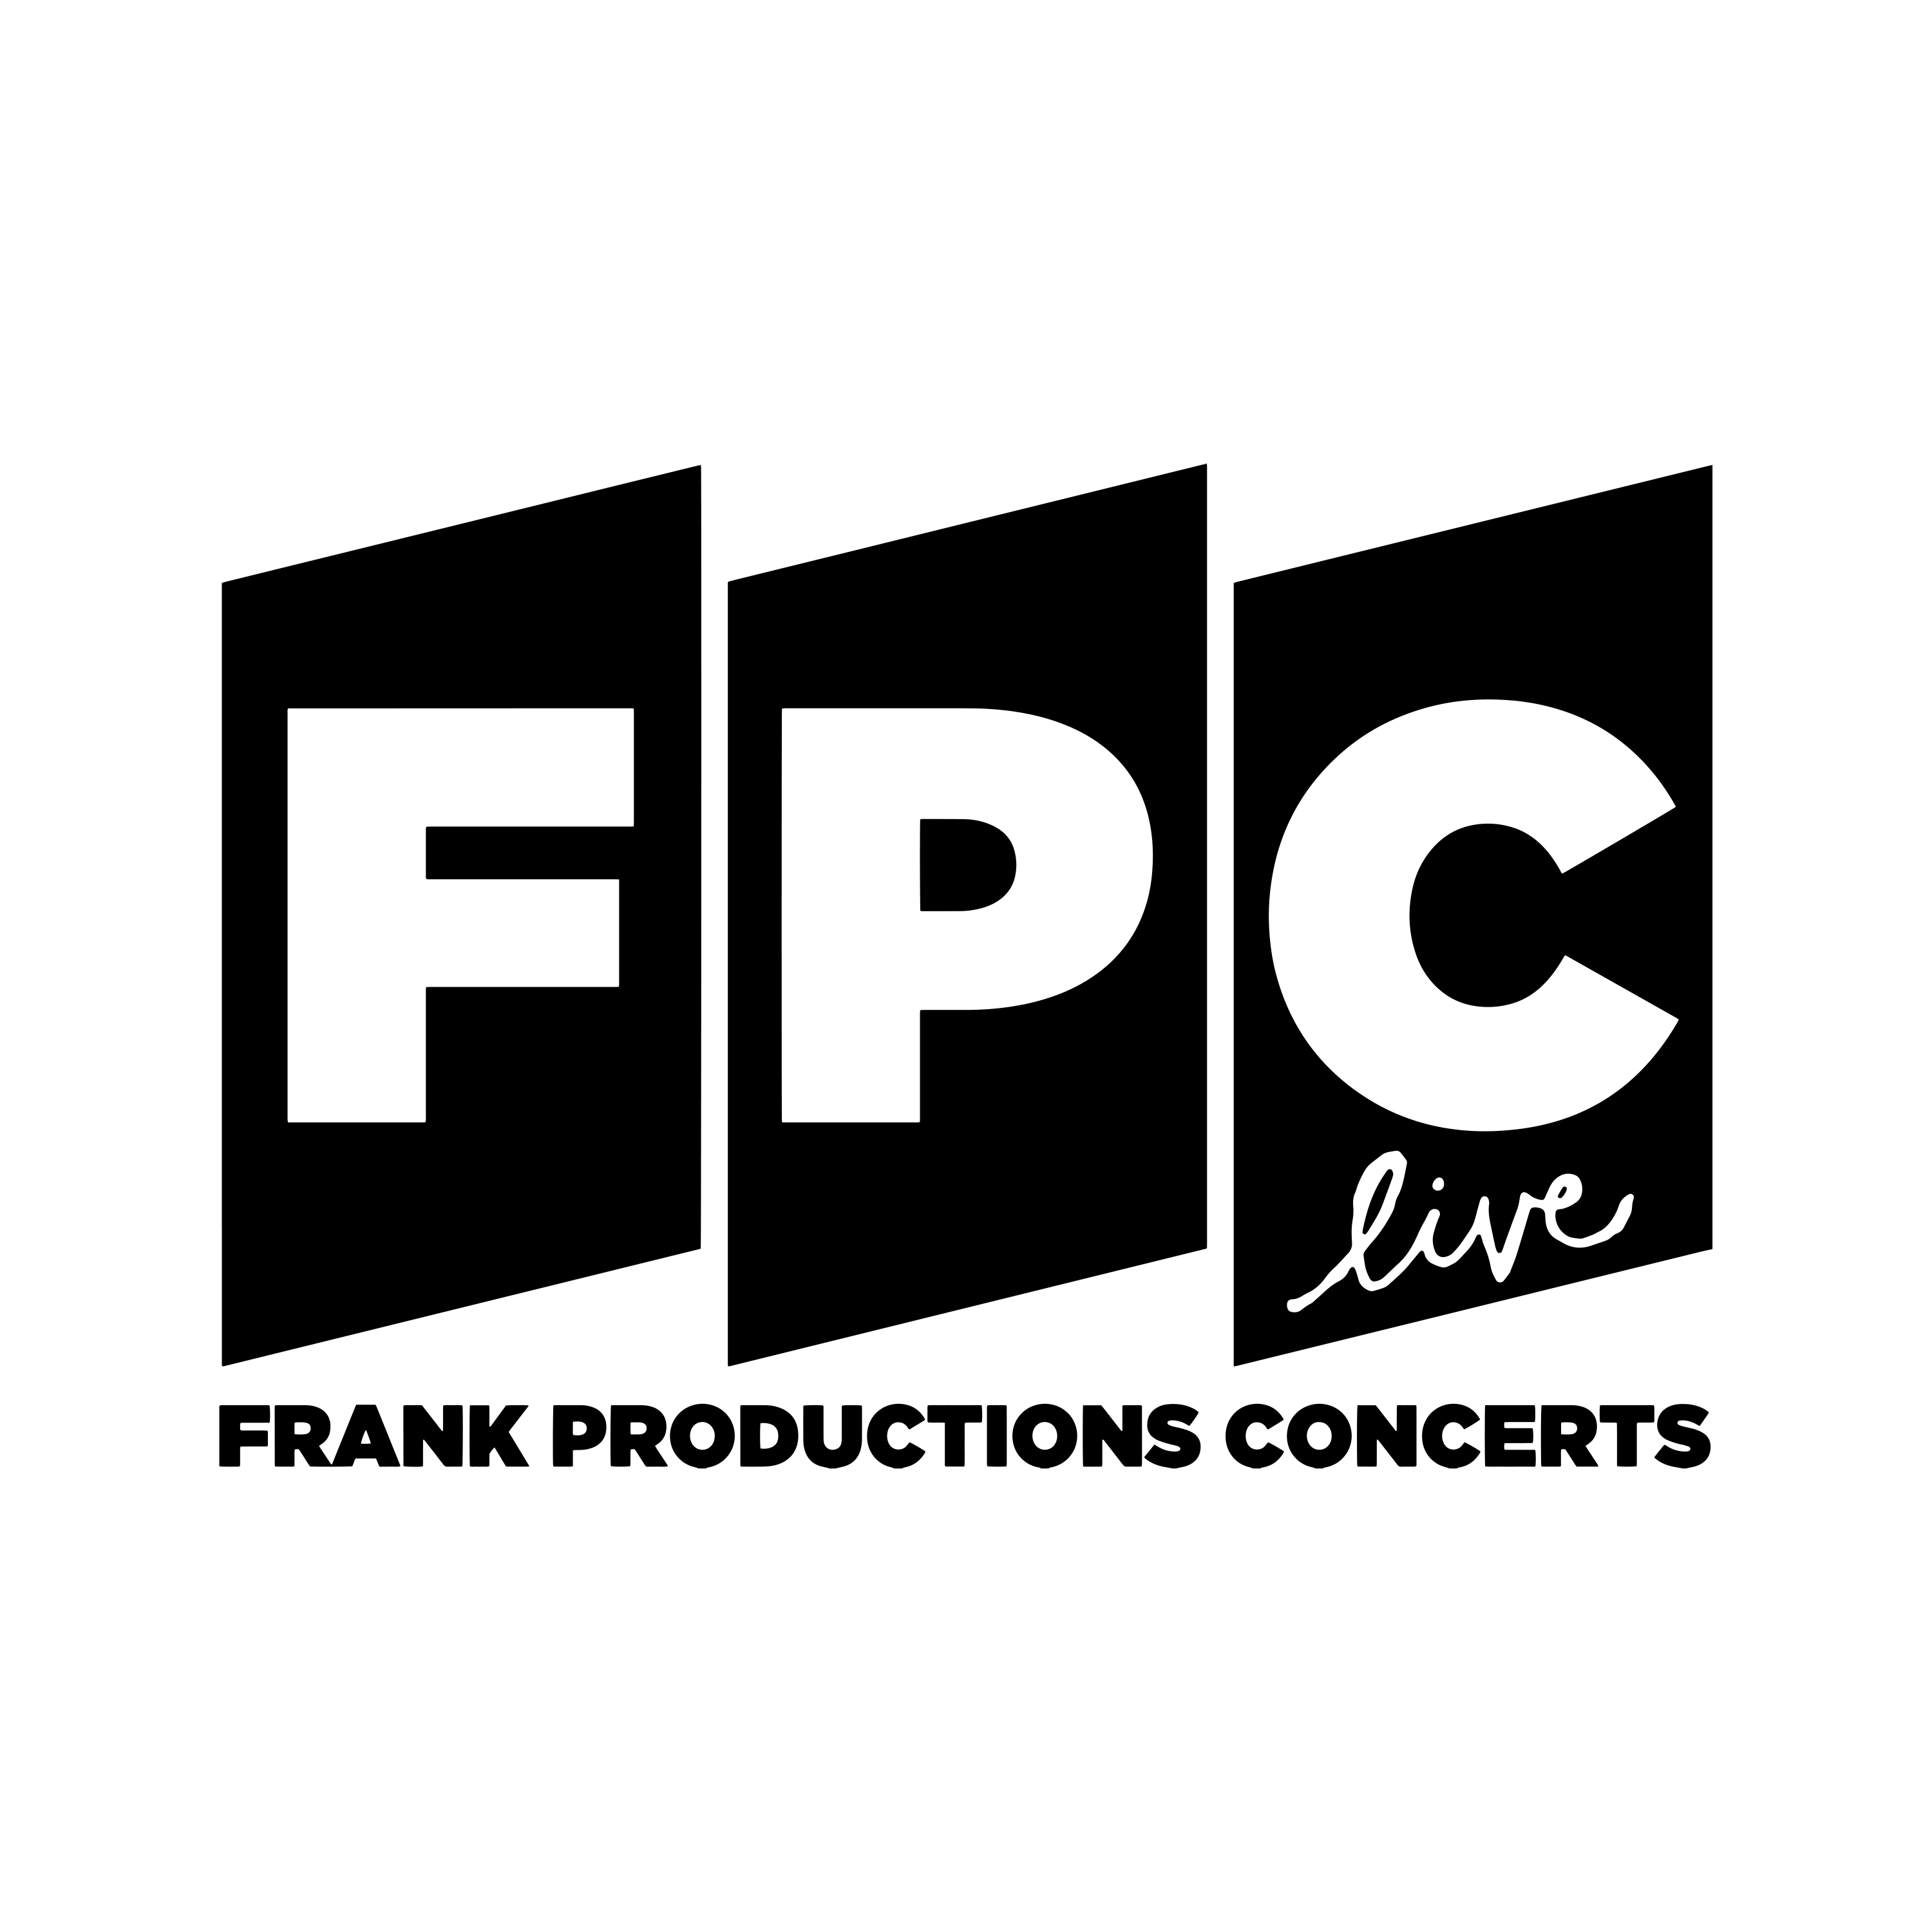 Frank Productions